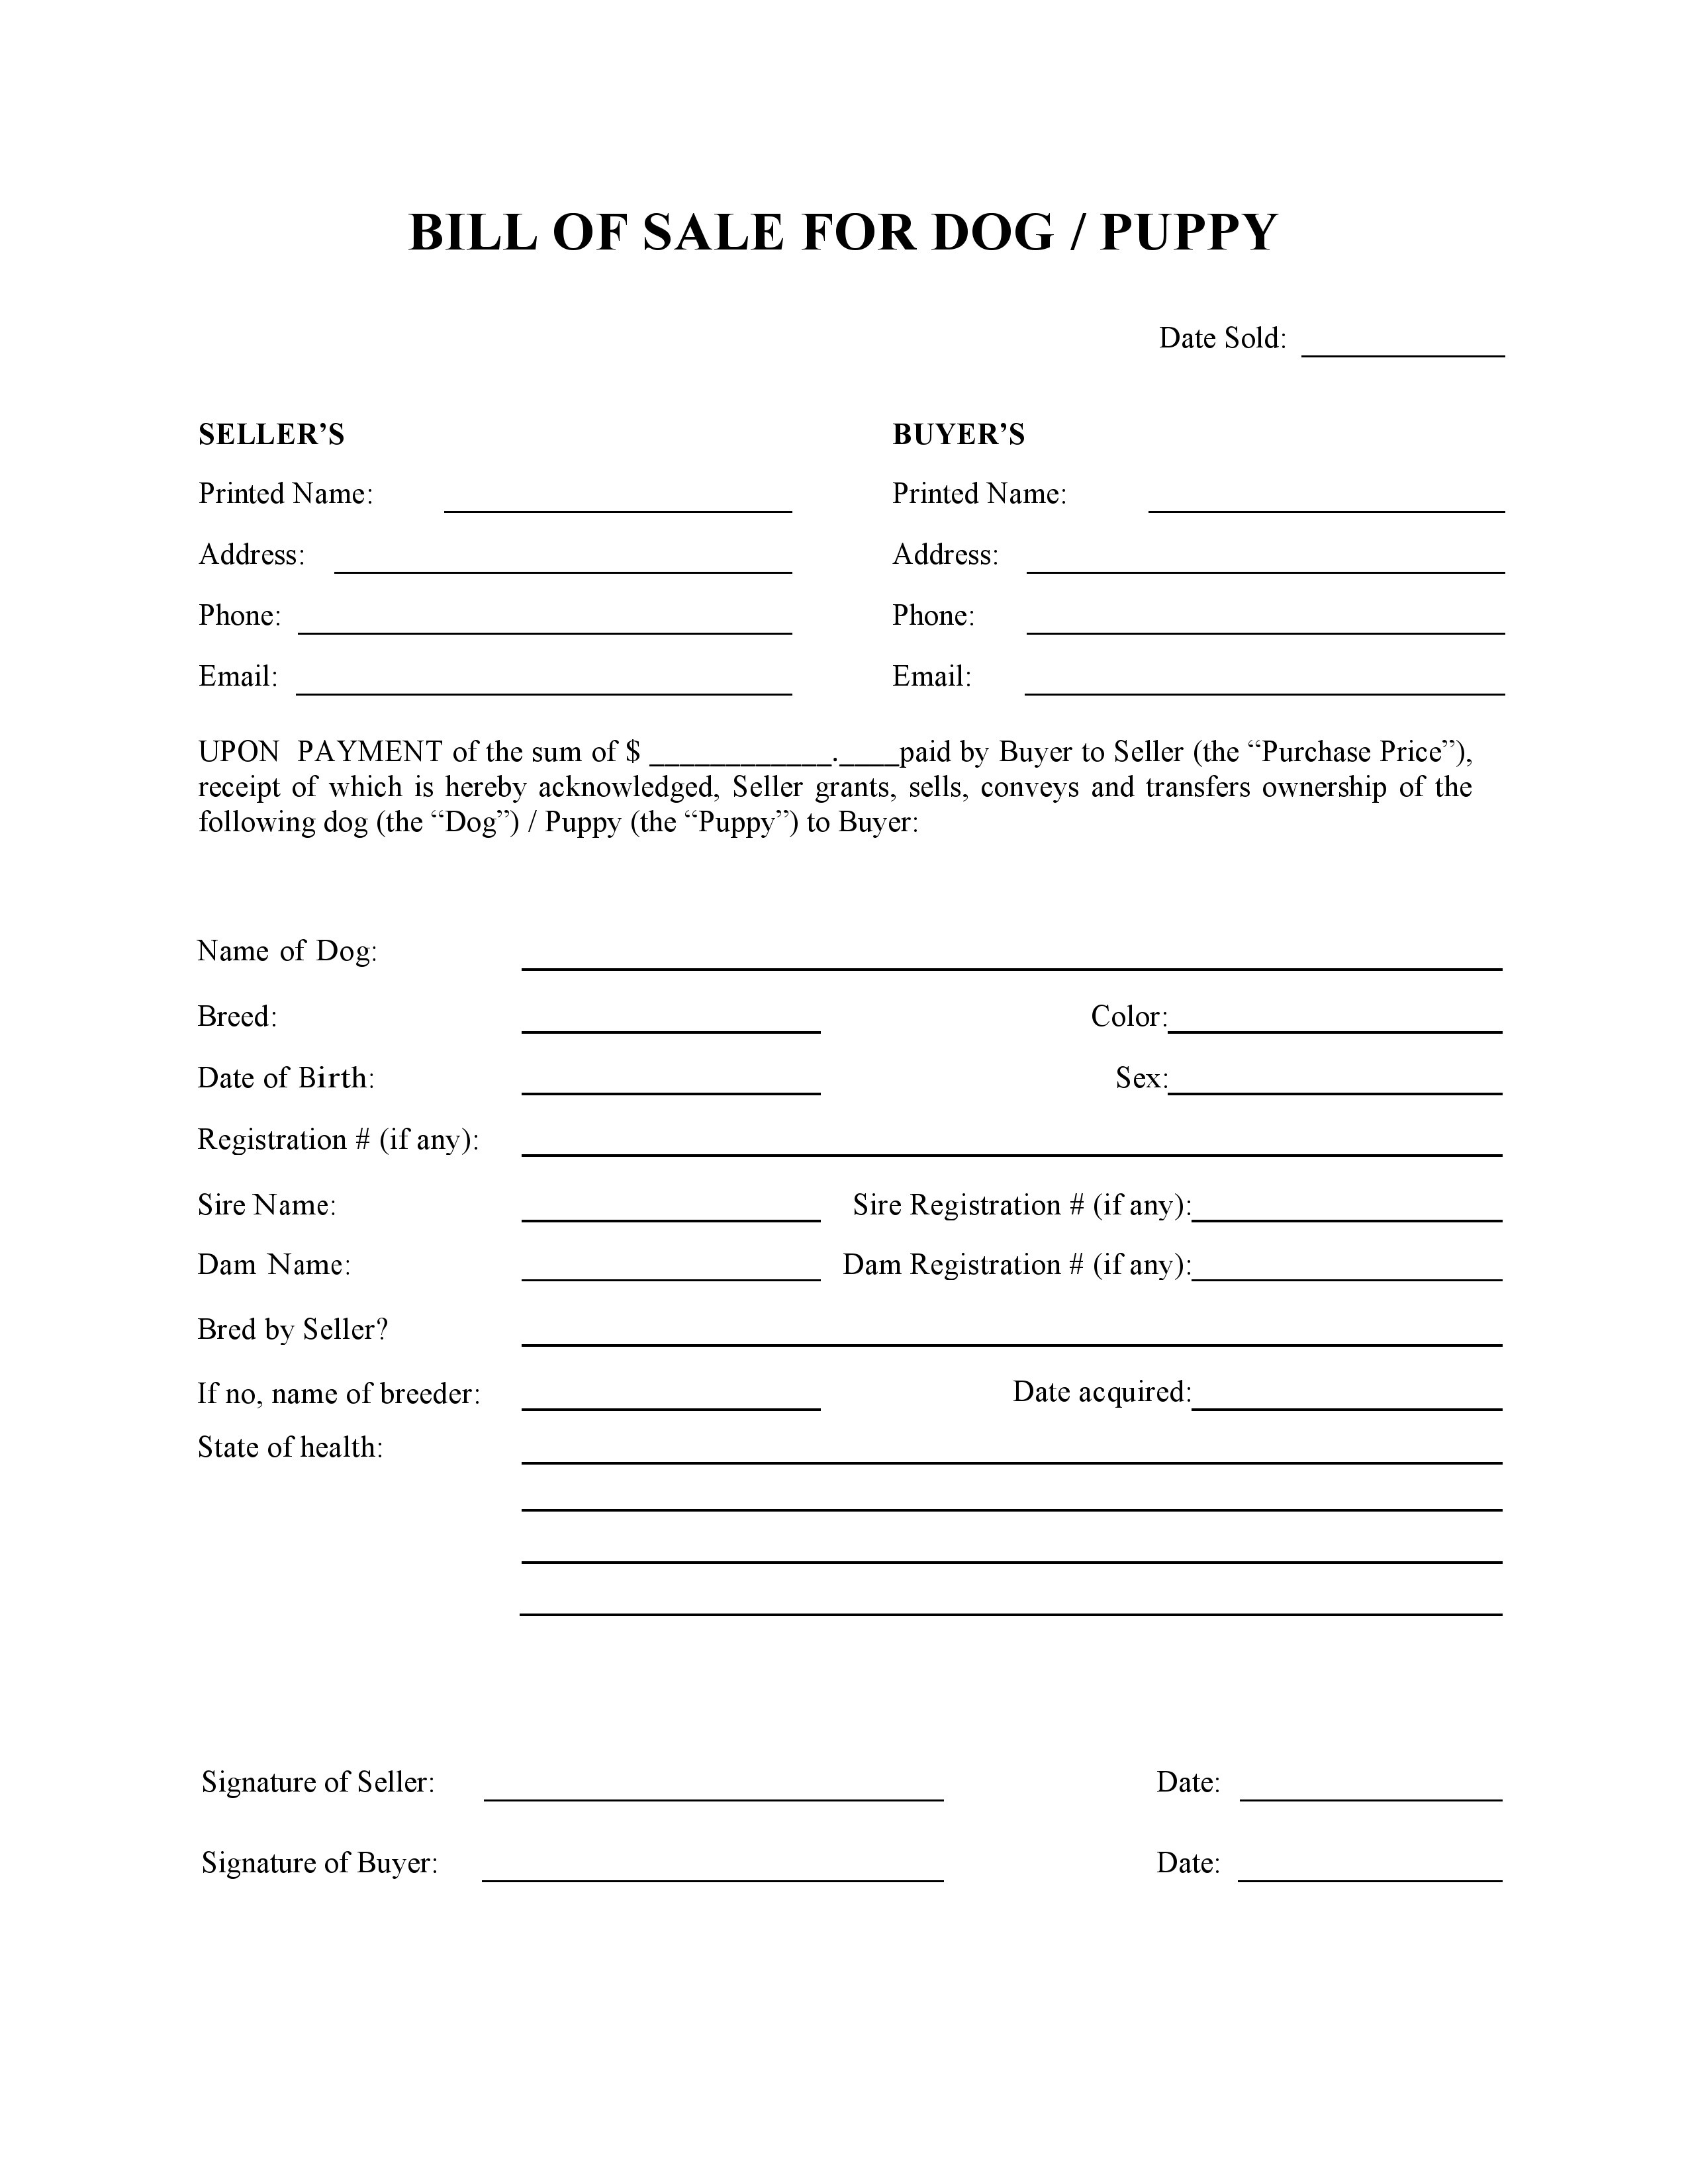 Free Dog Or Puppy Bill Of Sale Form | Pdf | Docx - Free Printable Puppy Sales Contract